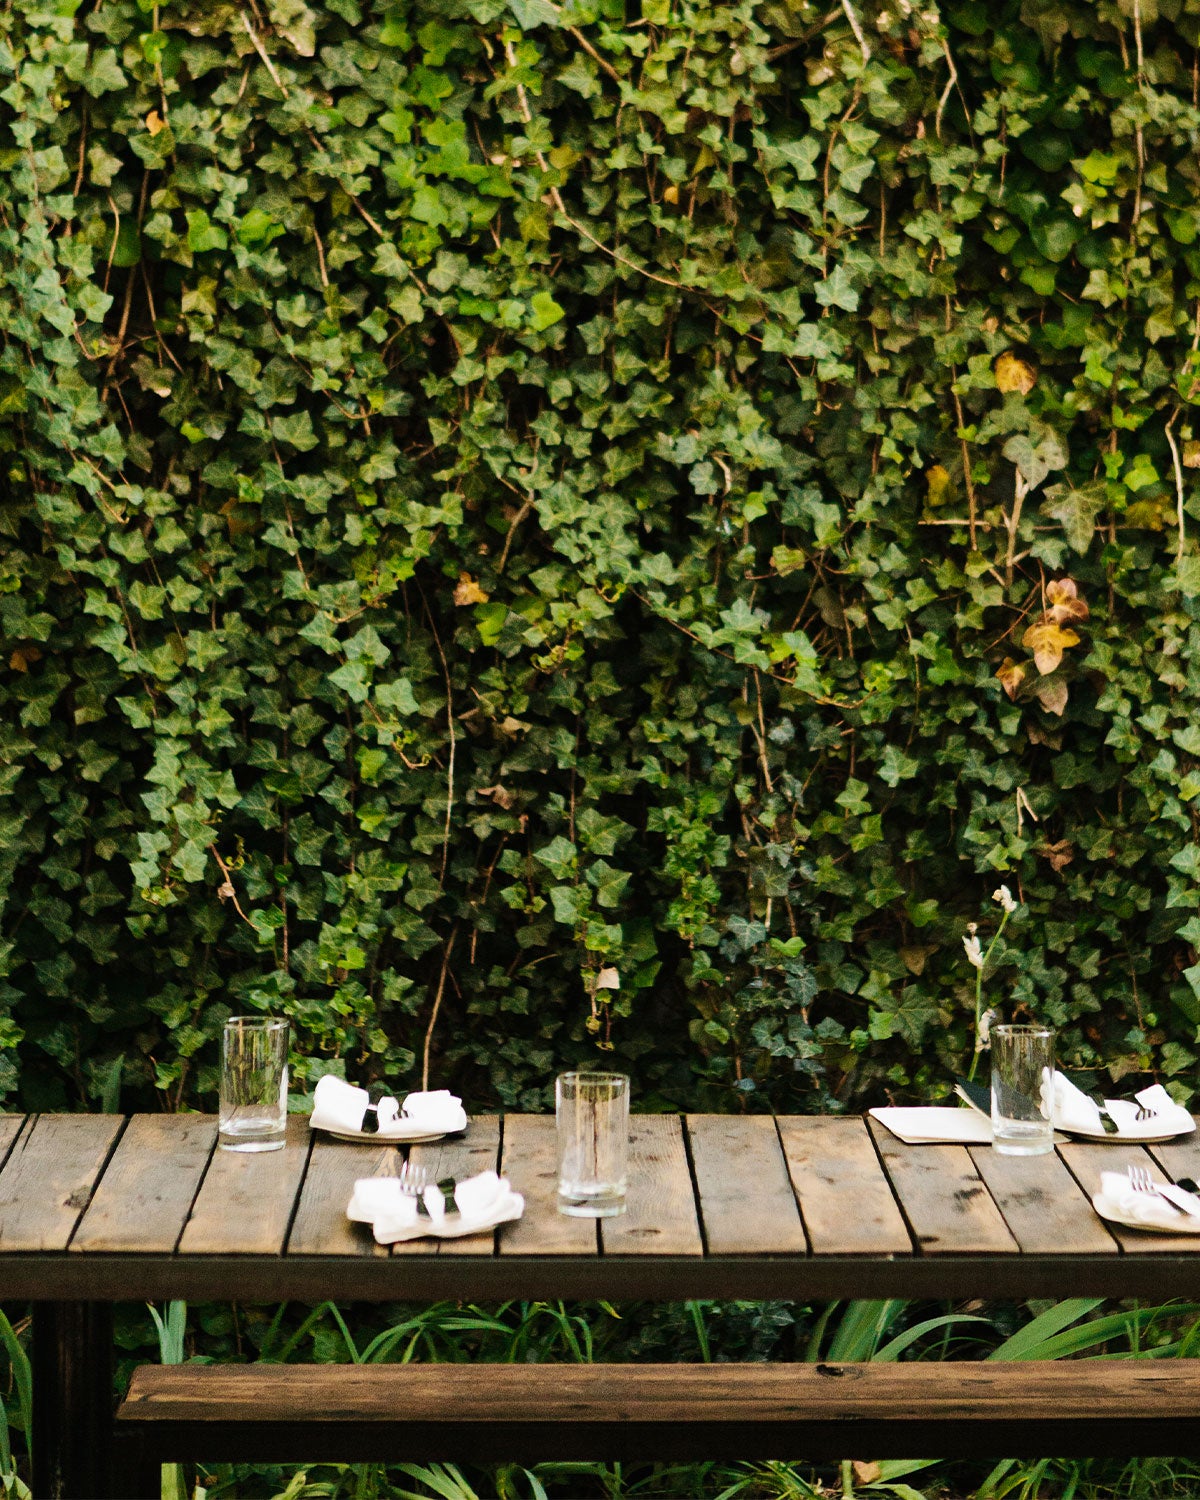 Restaurant patio with long vines covering the surrounding walls